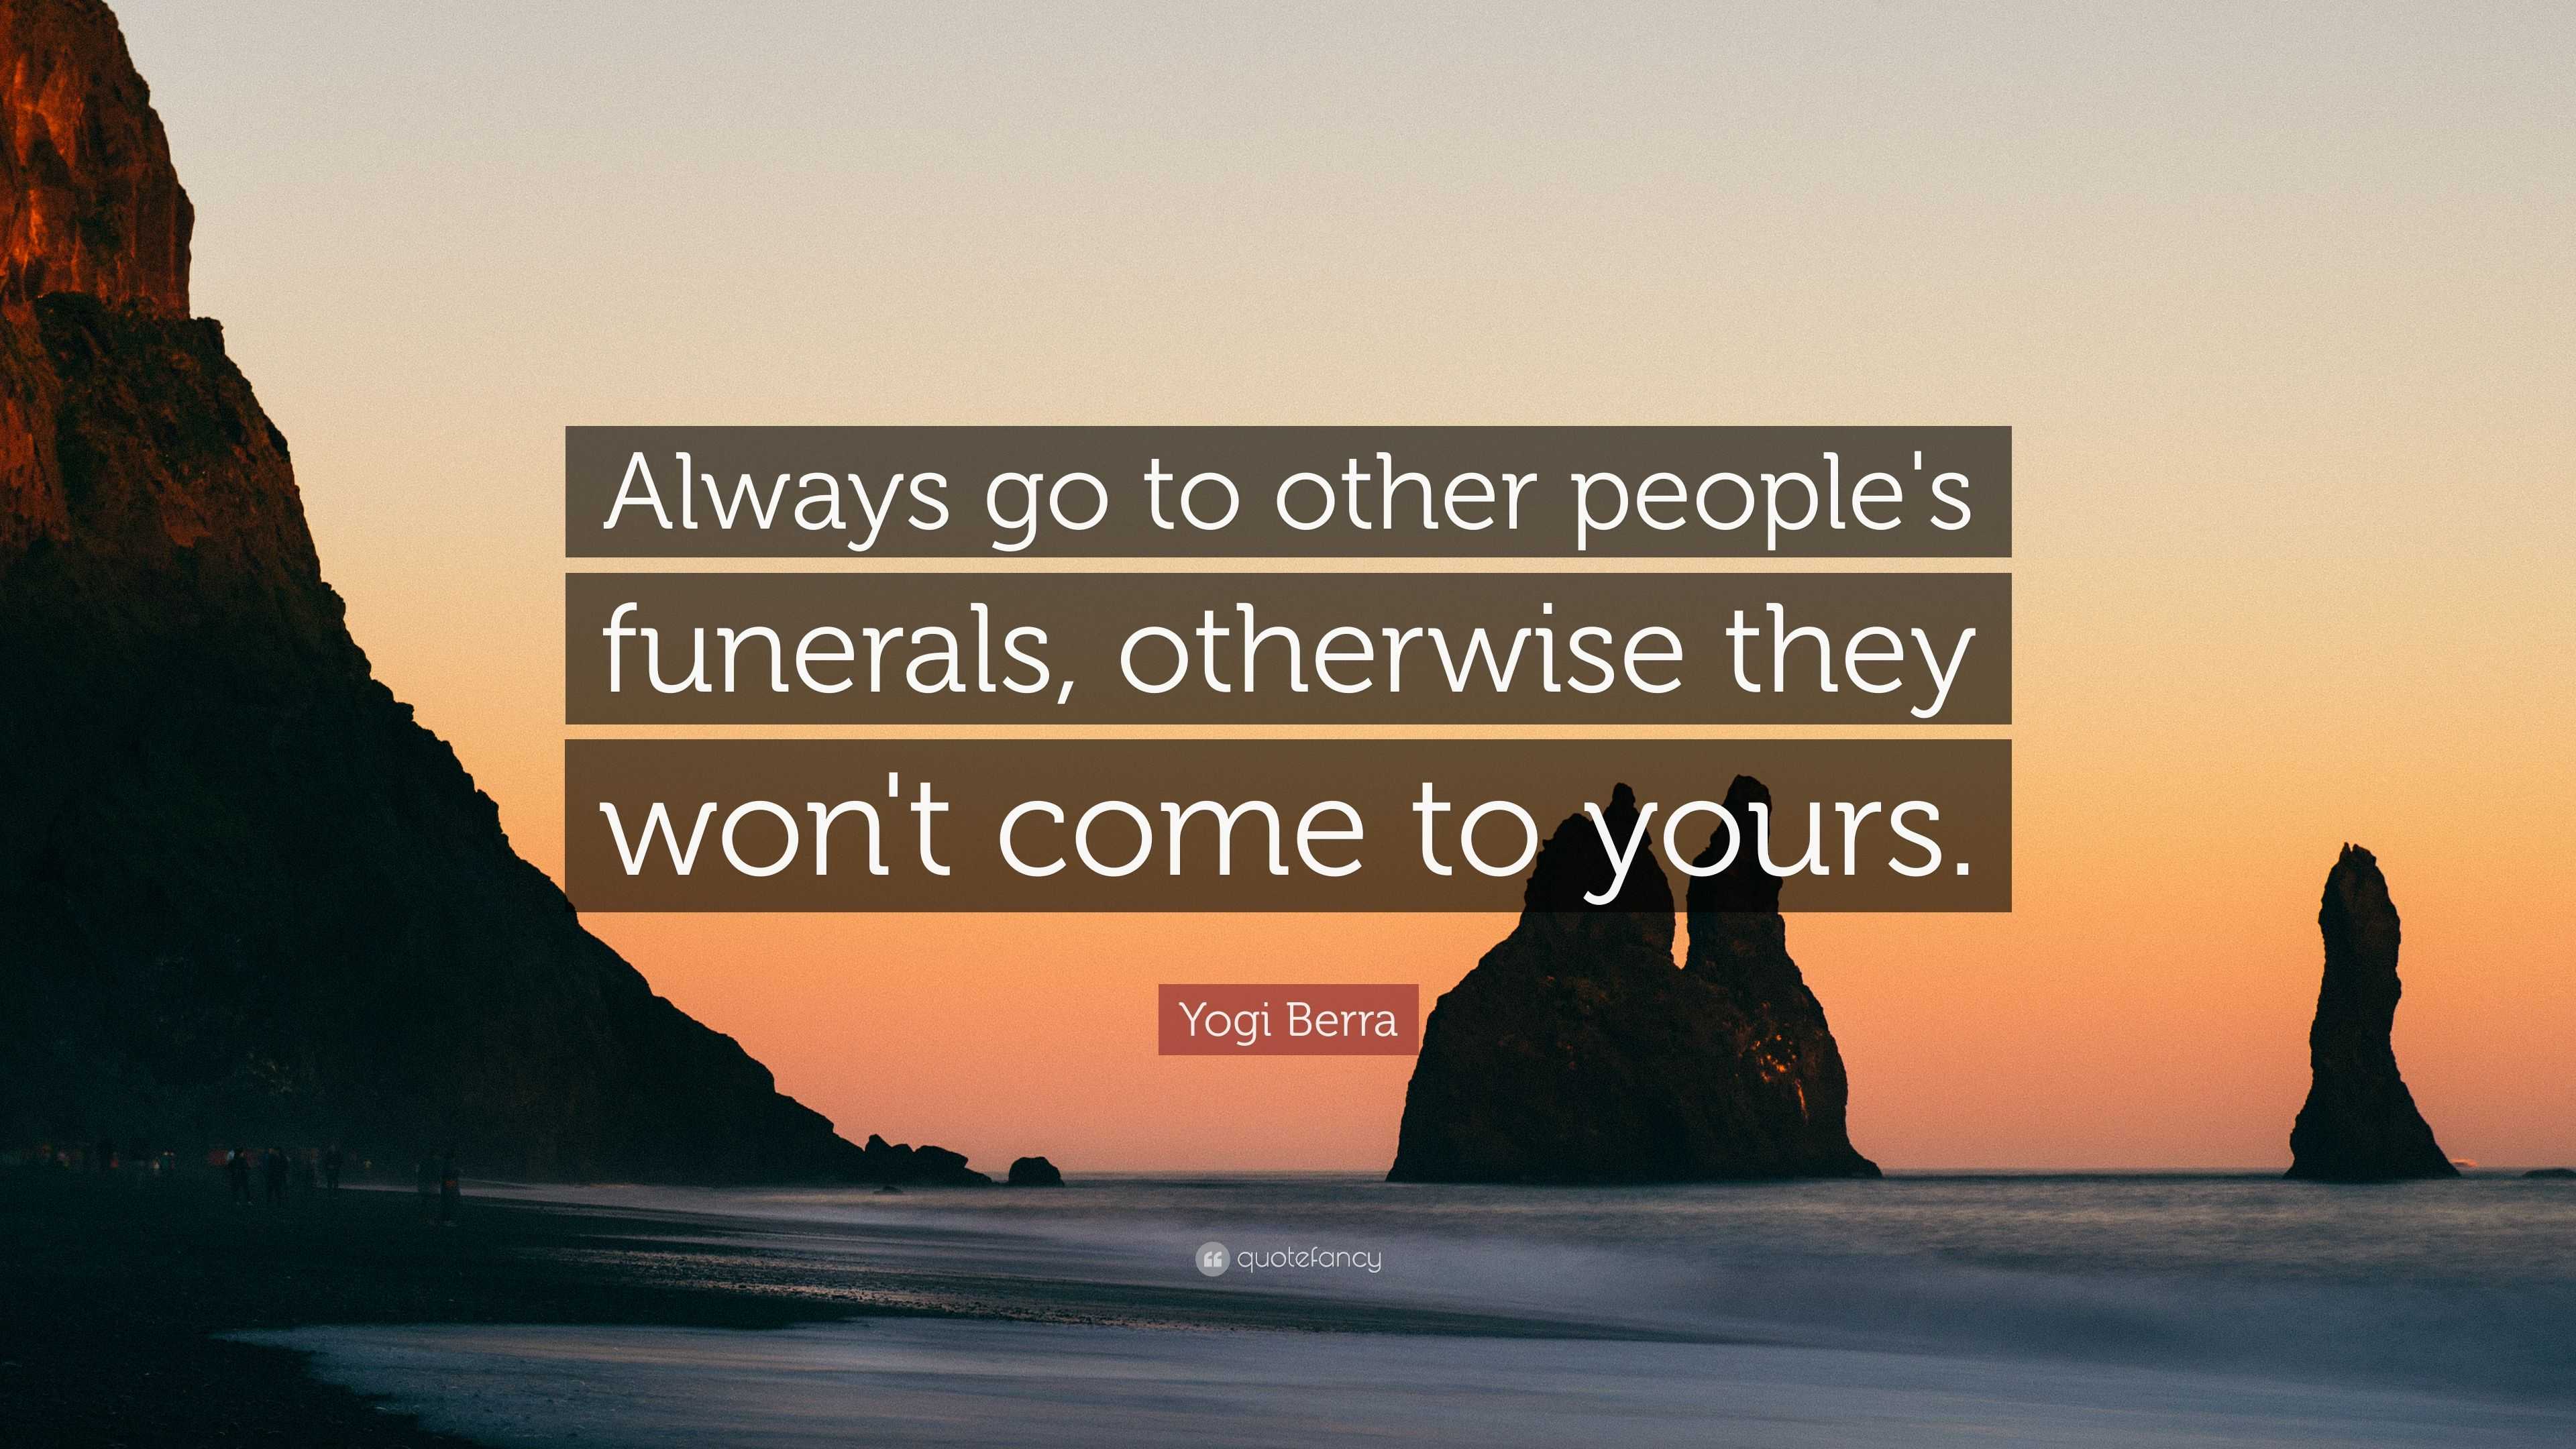 Yogi Berra quote: You should always go to other people's funerals,  otherwise, they